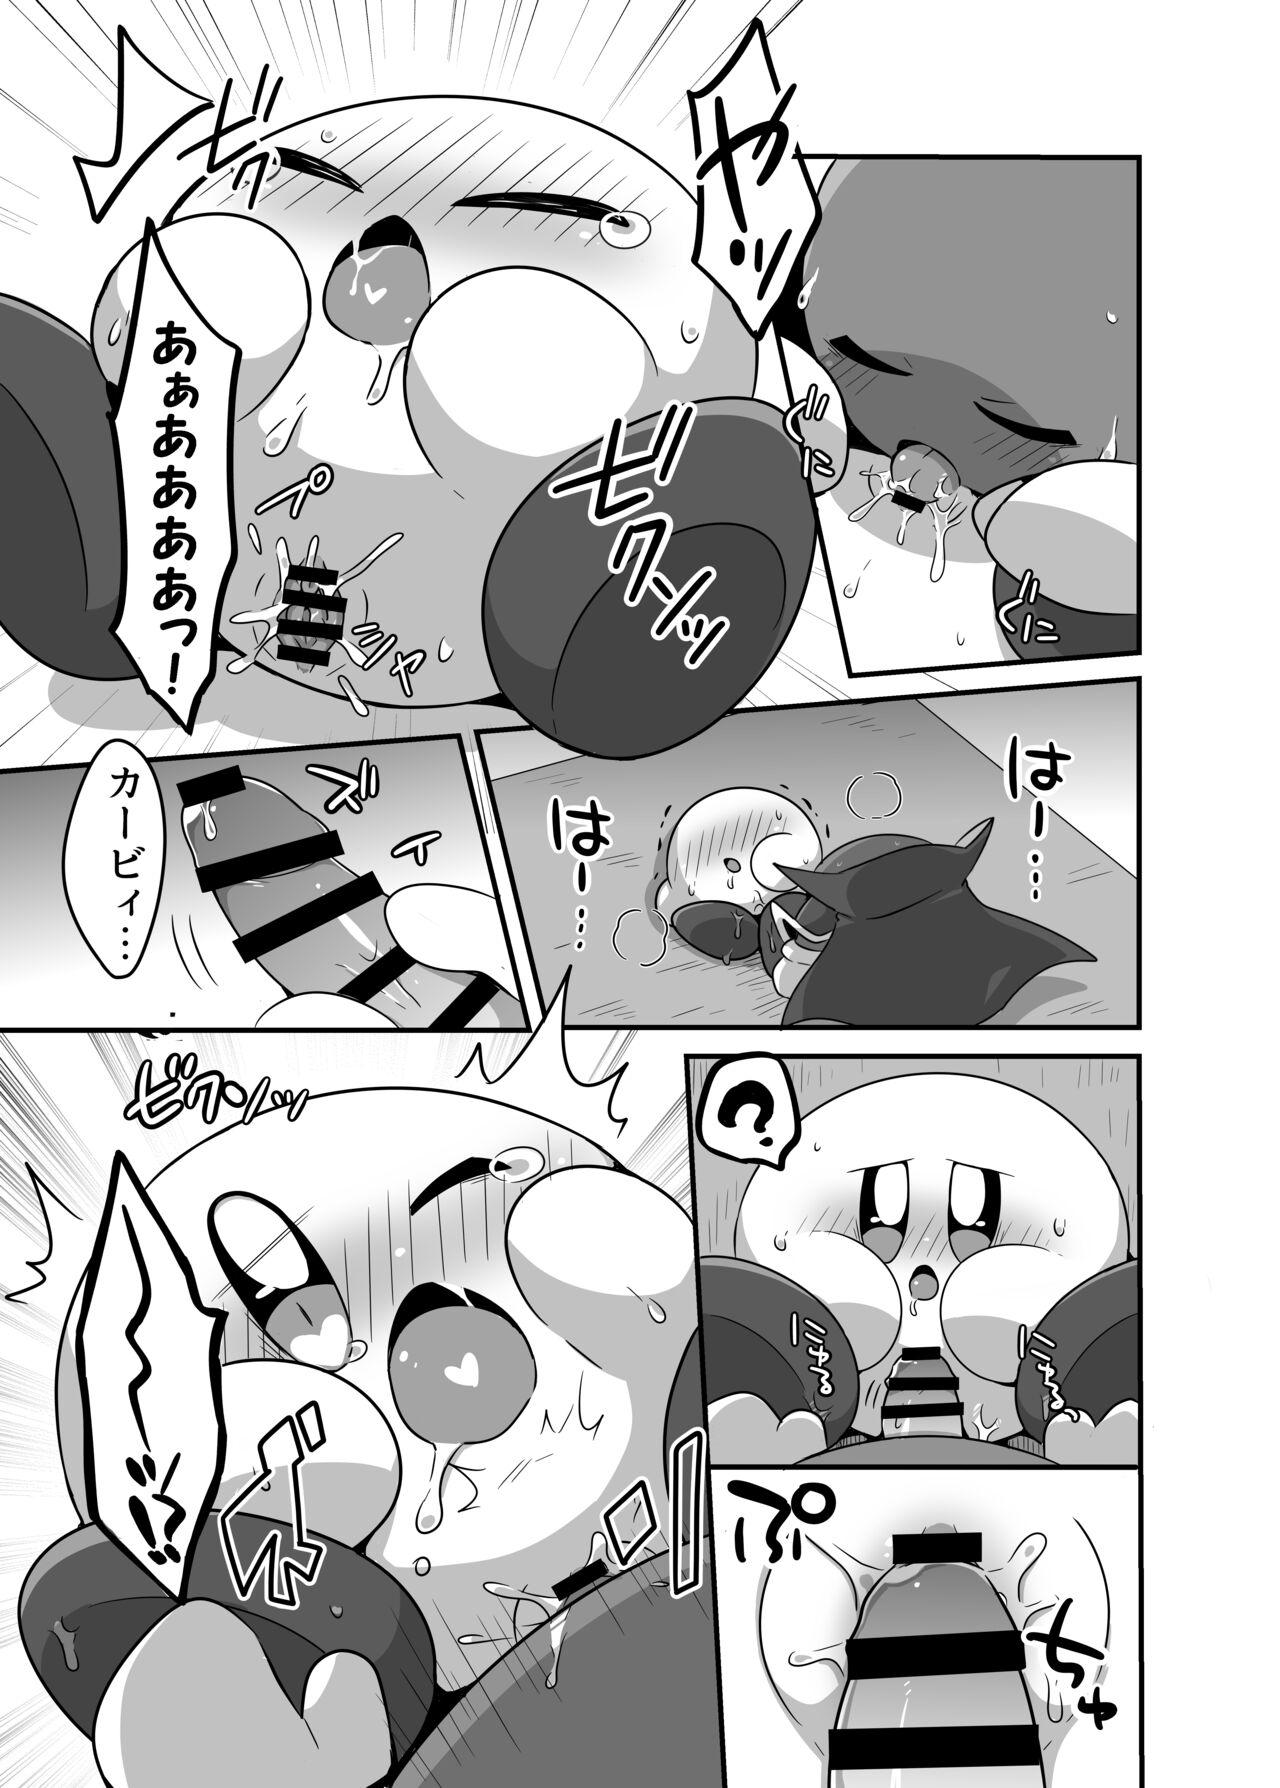 Chupando I Want to Do XXX Even For Spheres! - Kirby Wam - Page 11